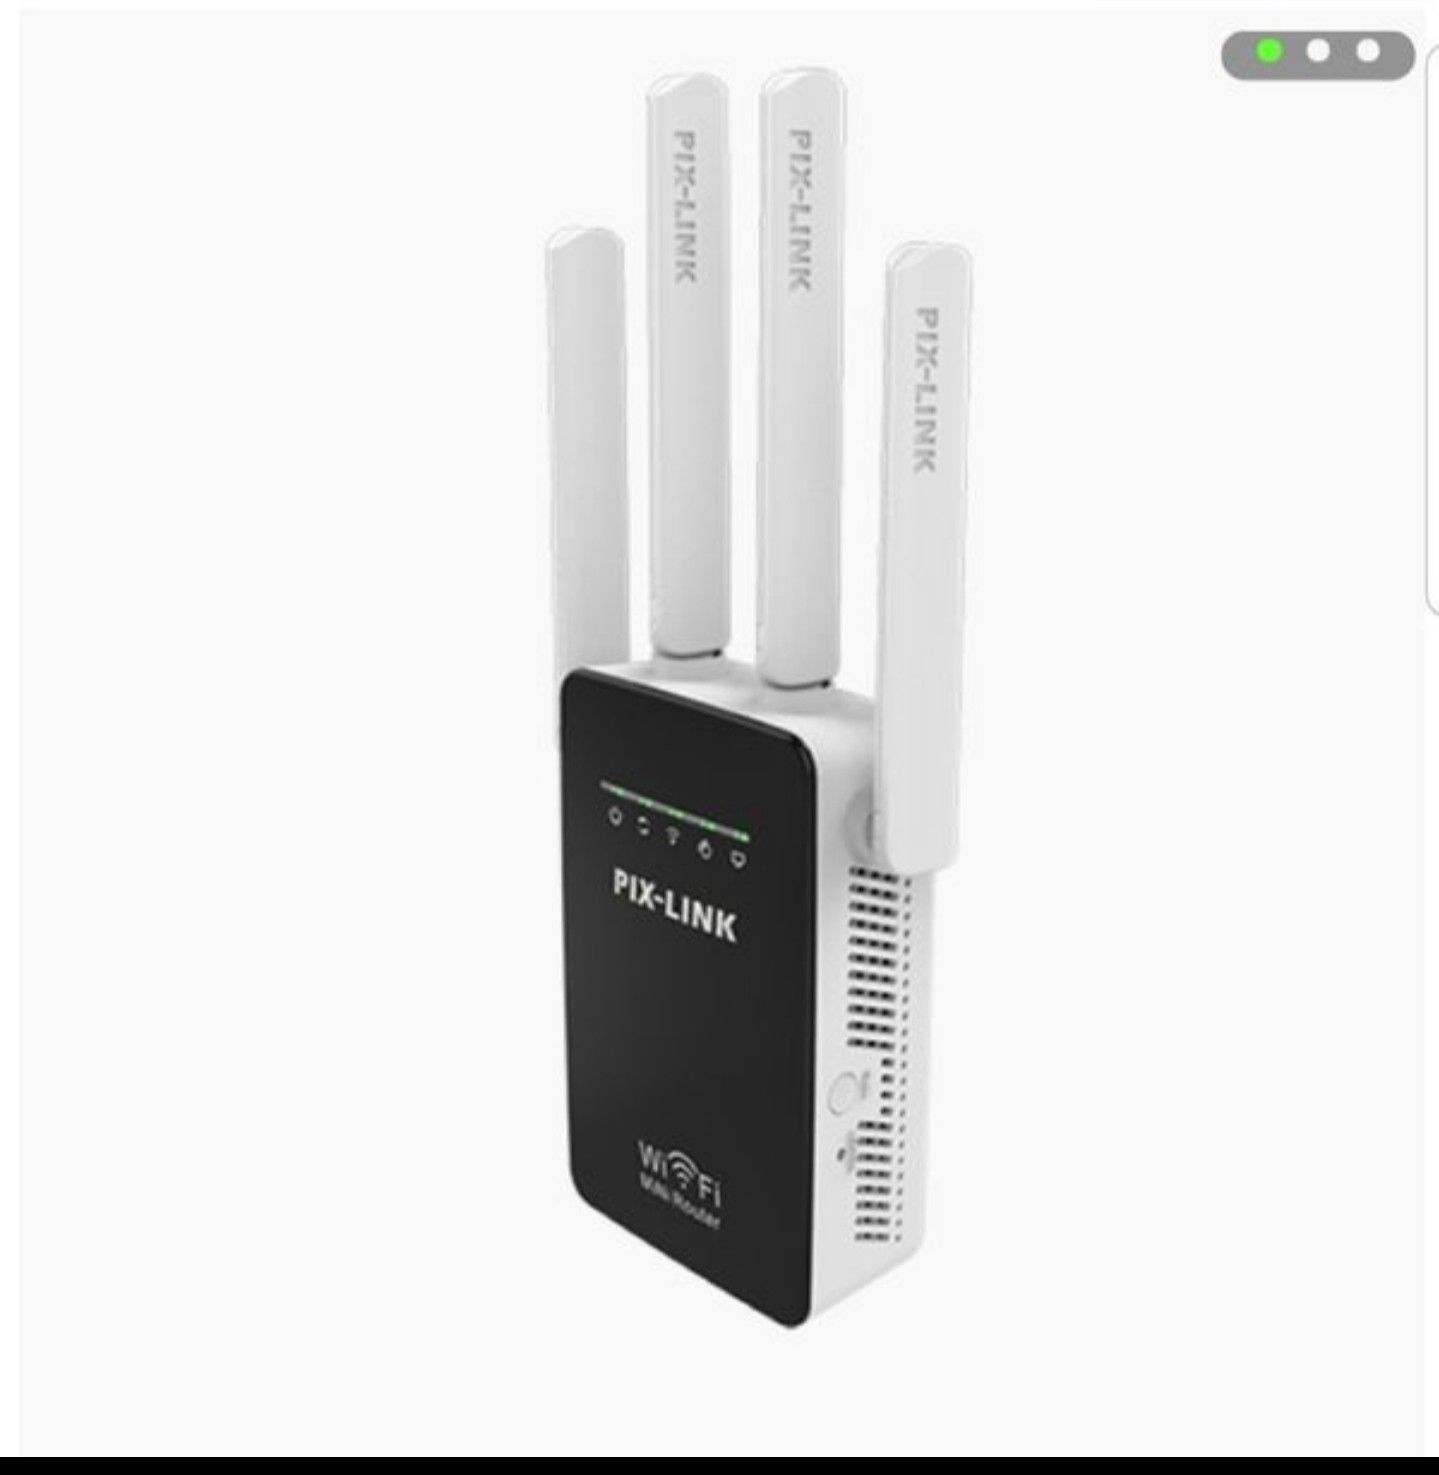 LV-WR09 300Mbps Wireless-N Repeater/Router/AP